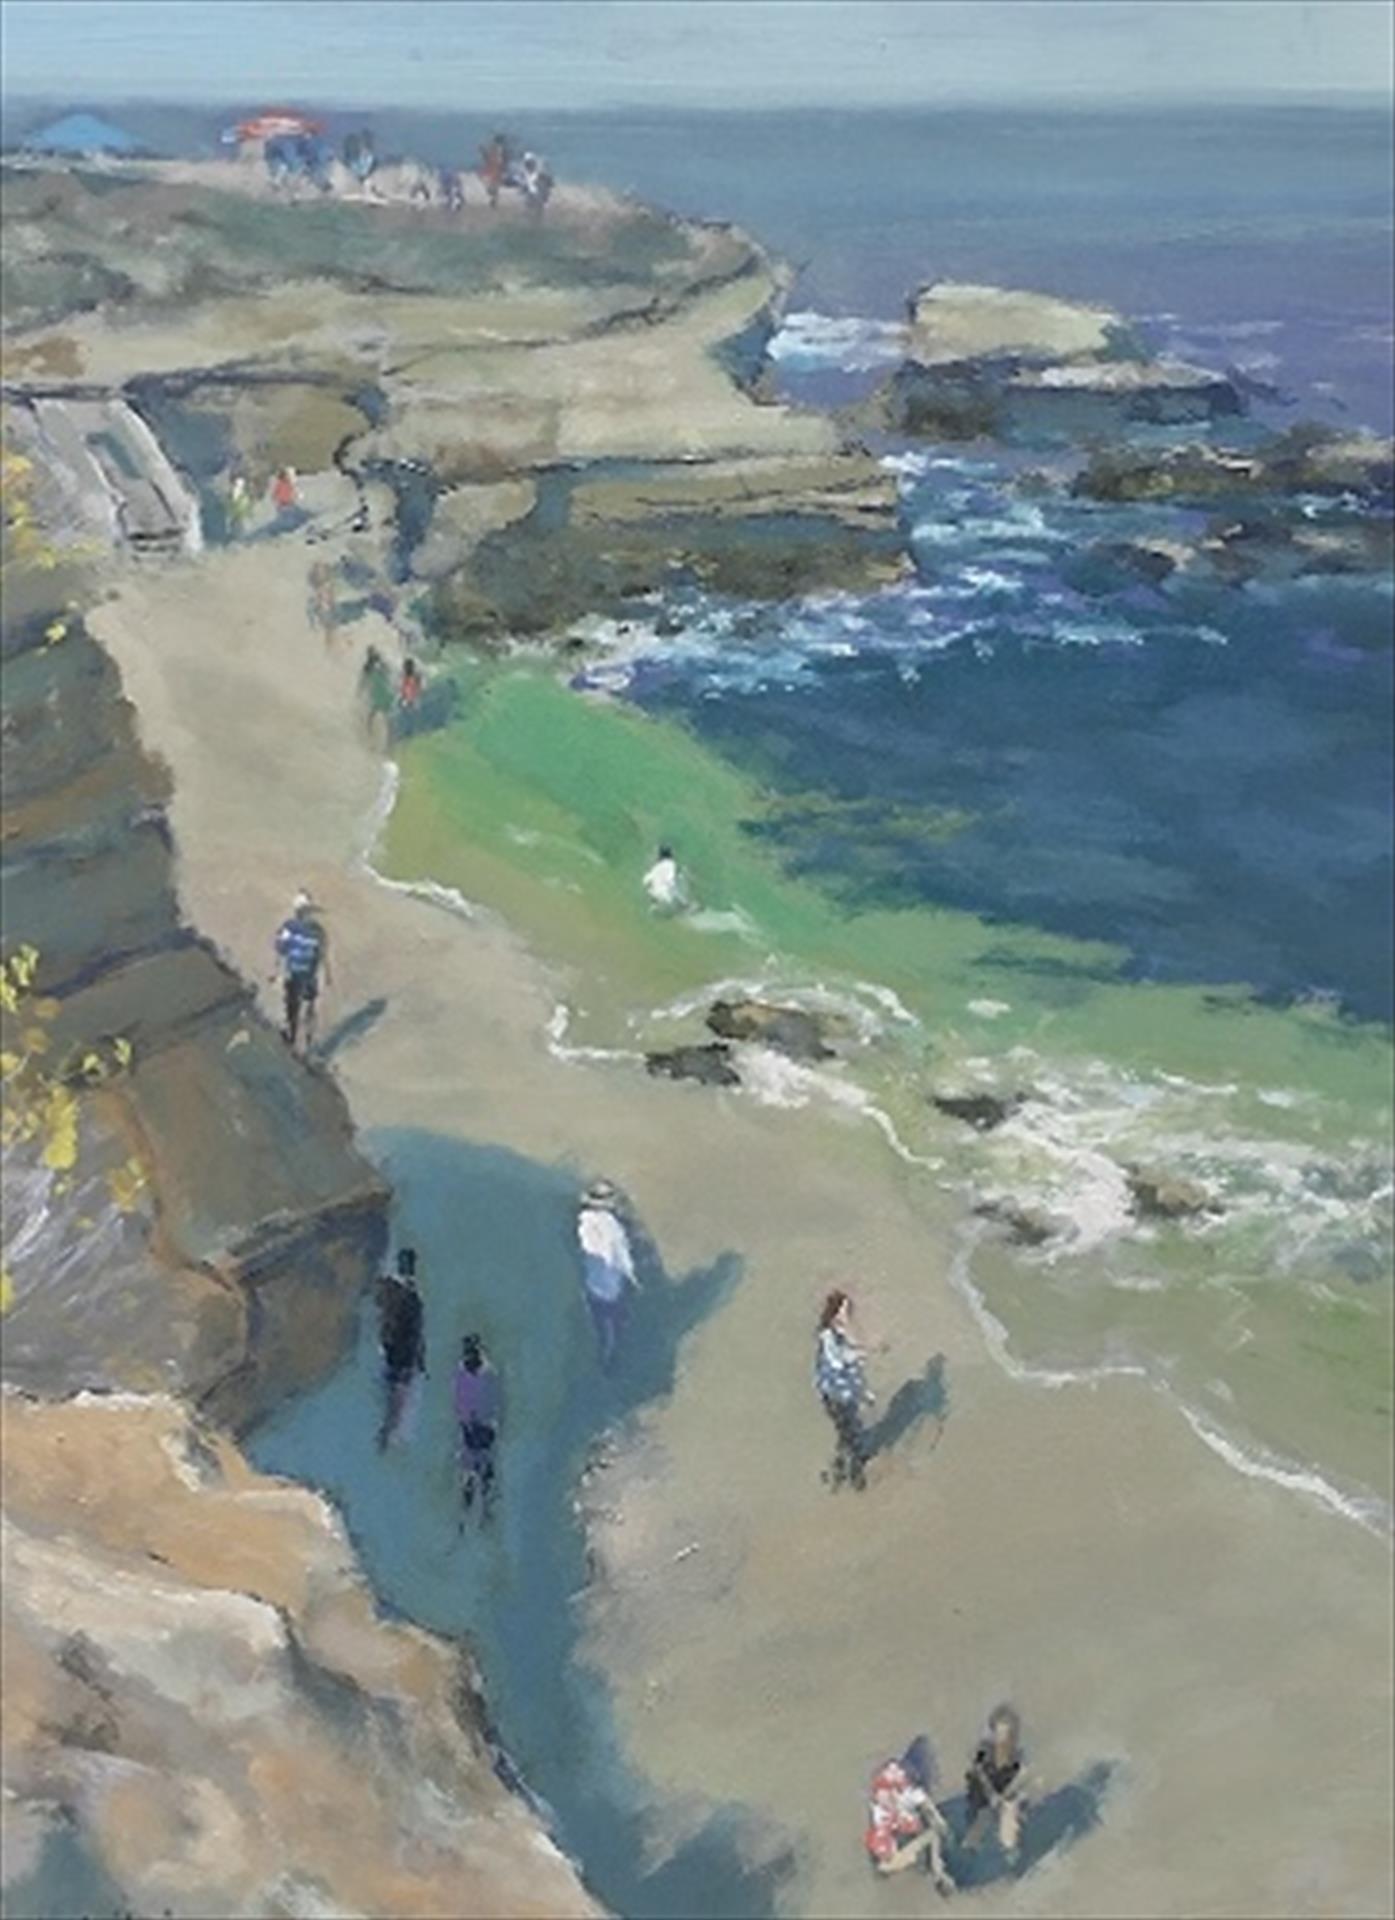 Third place: "La Jolla Cove" (oil, 16 x 20 in.) by Michael Hill